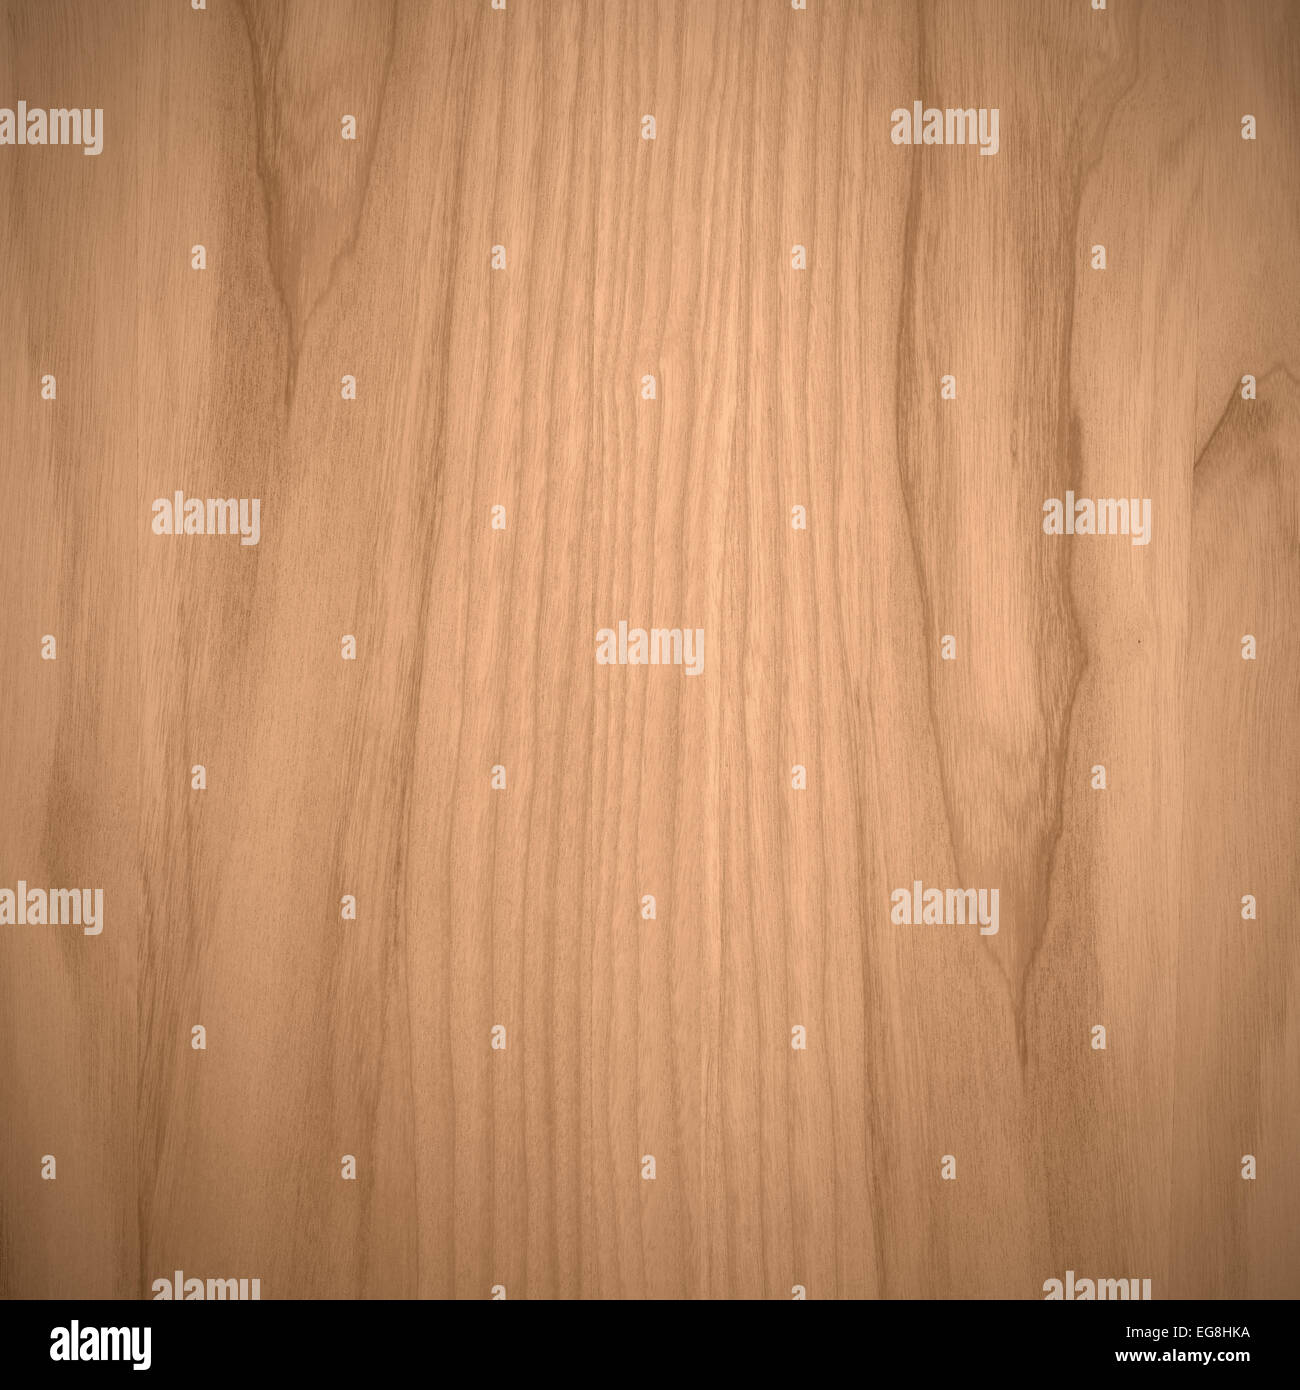 raw wooden plank background or wood grain brown texture Stock Photo